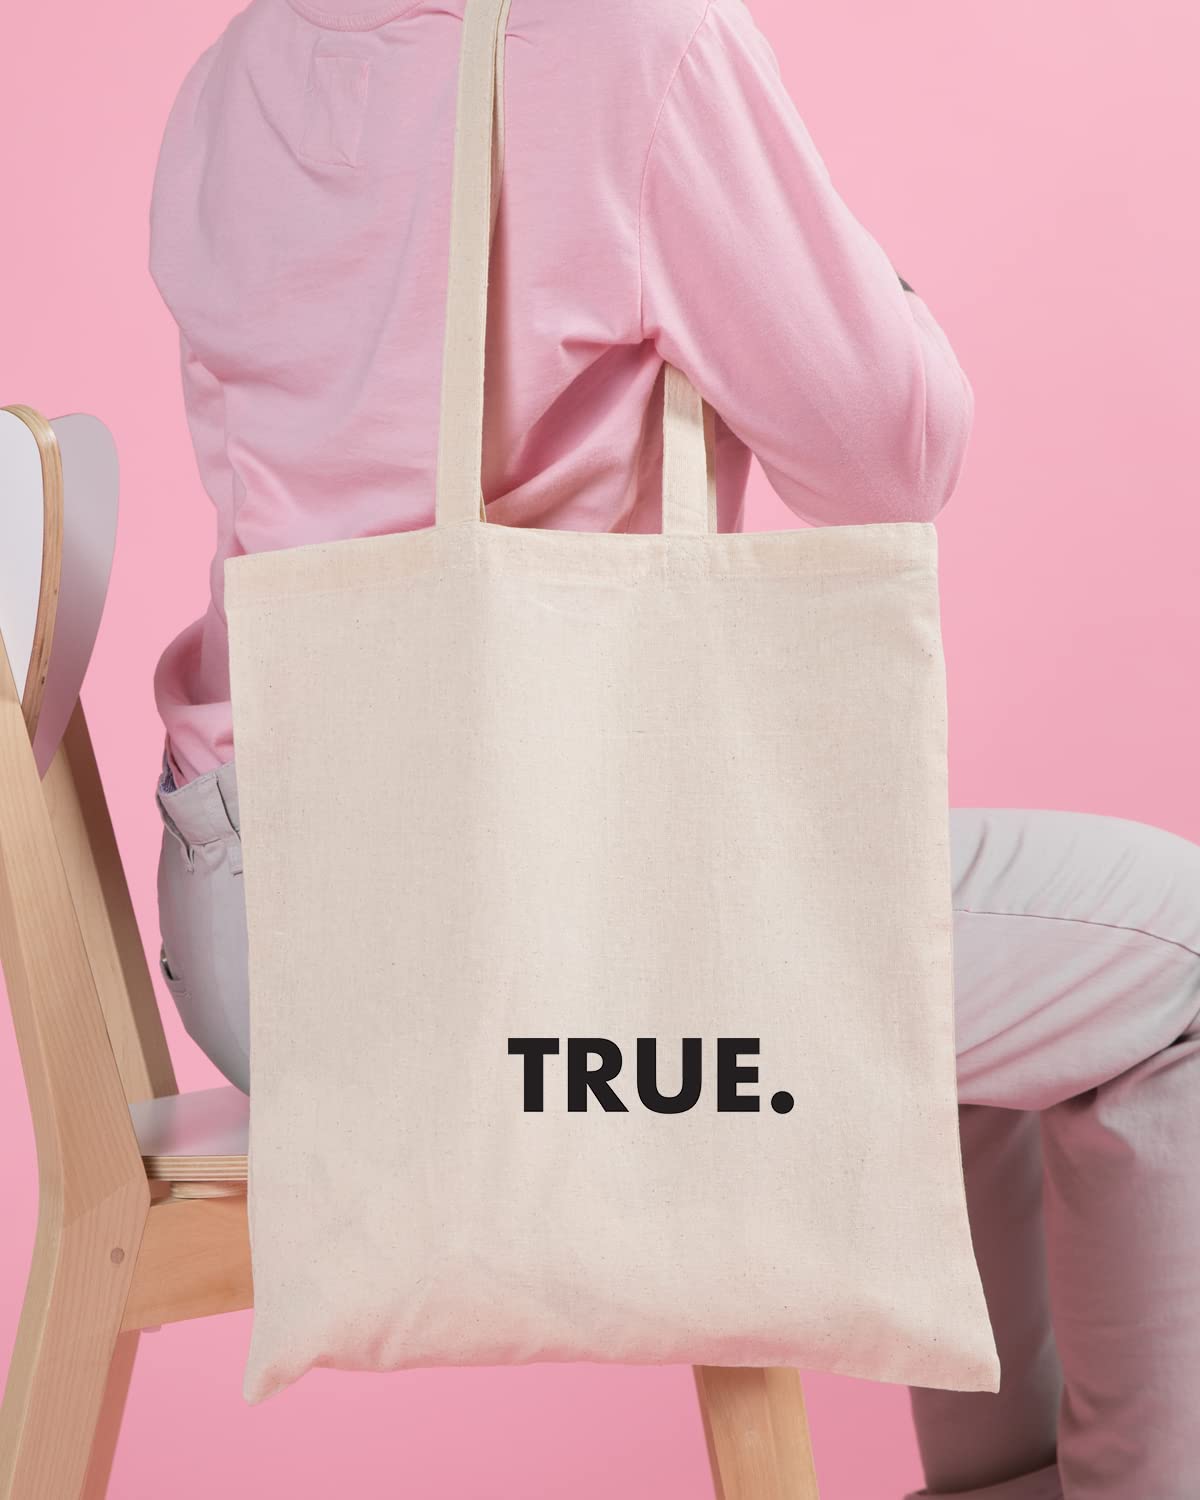 The Pink Magnet True Tote Bag - Canvas Tote Bag for Women | Printed Multipurpose Cotton Bags | Cute Hand Bag for Girls | Best for College, Travel, Grocery | Reusable Shopping Bag | Eco-Friendly Tote Bag